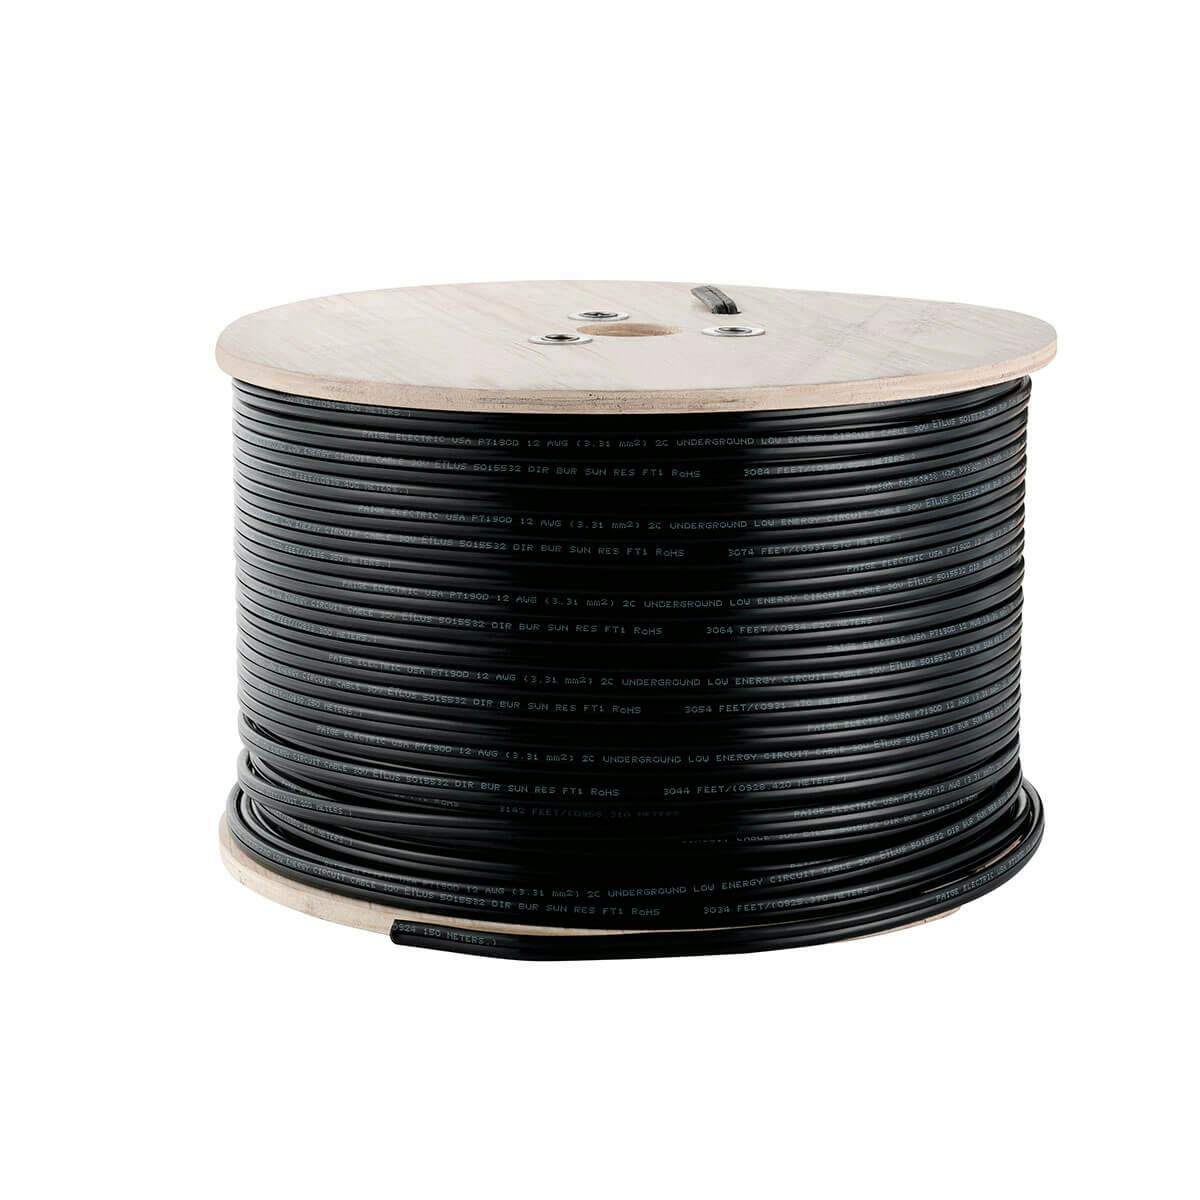 12 Gauge 1000' Low Voltage Cable Black on a white background